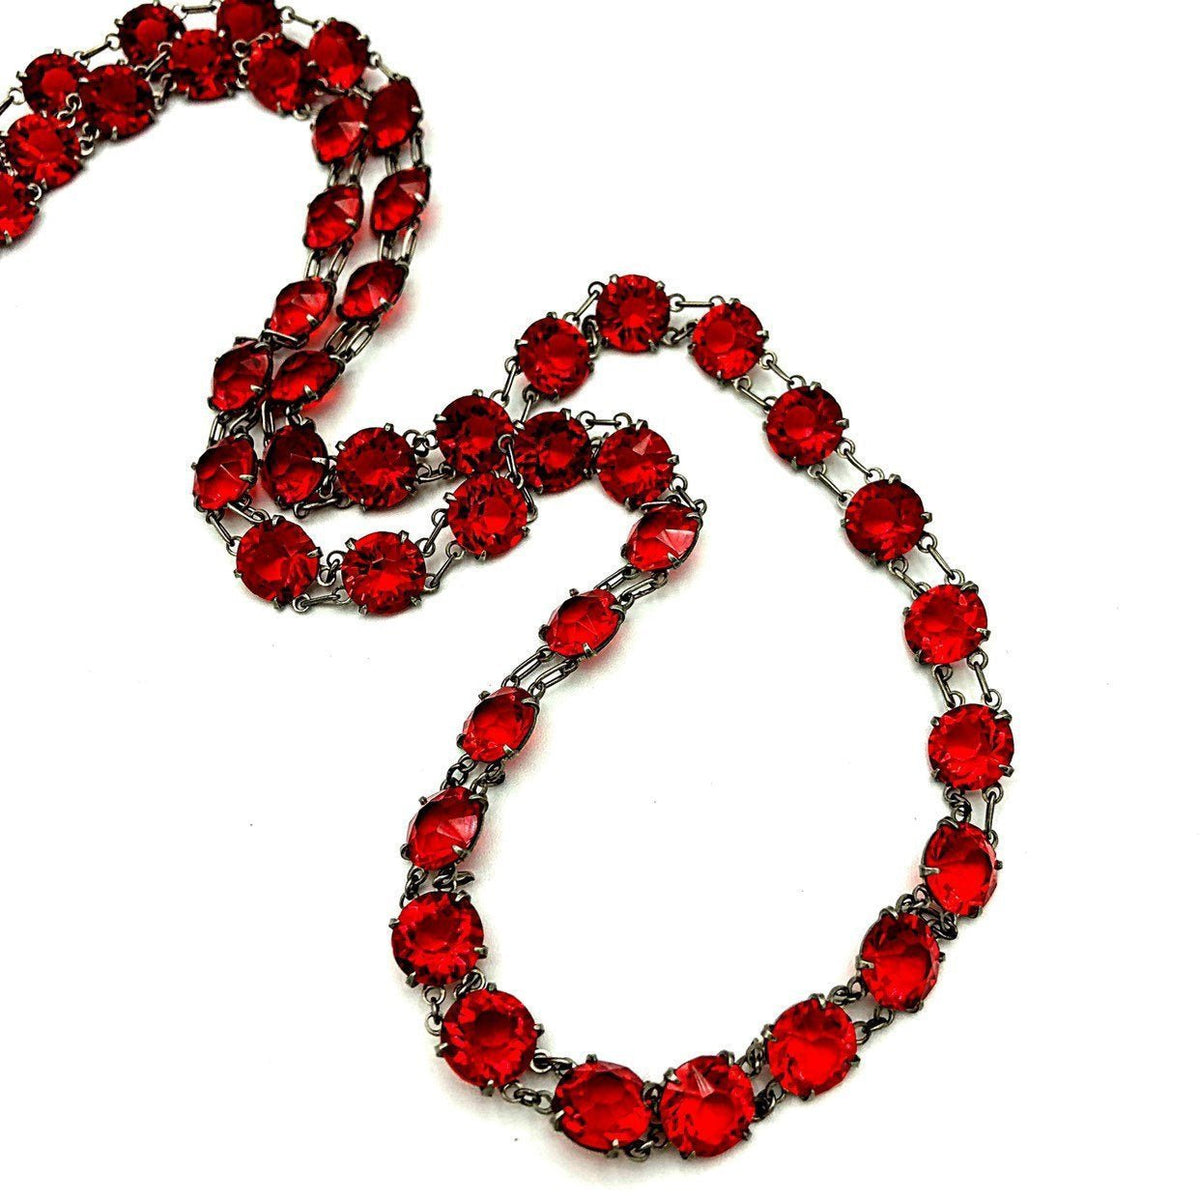 Vintage Art Deco Red Crystals Long Necklace - 24 Wishes Vintage Jewelry